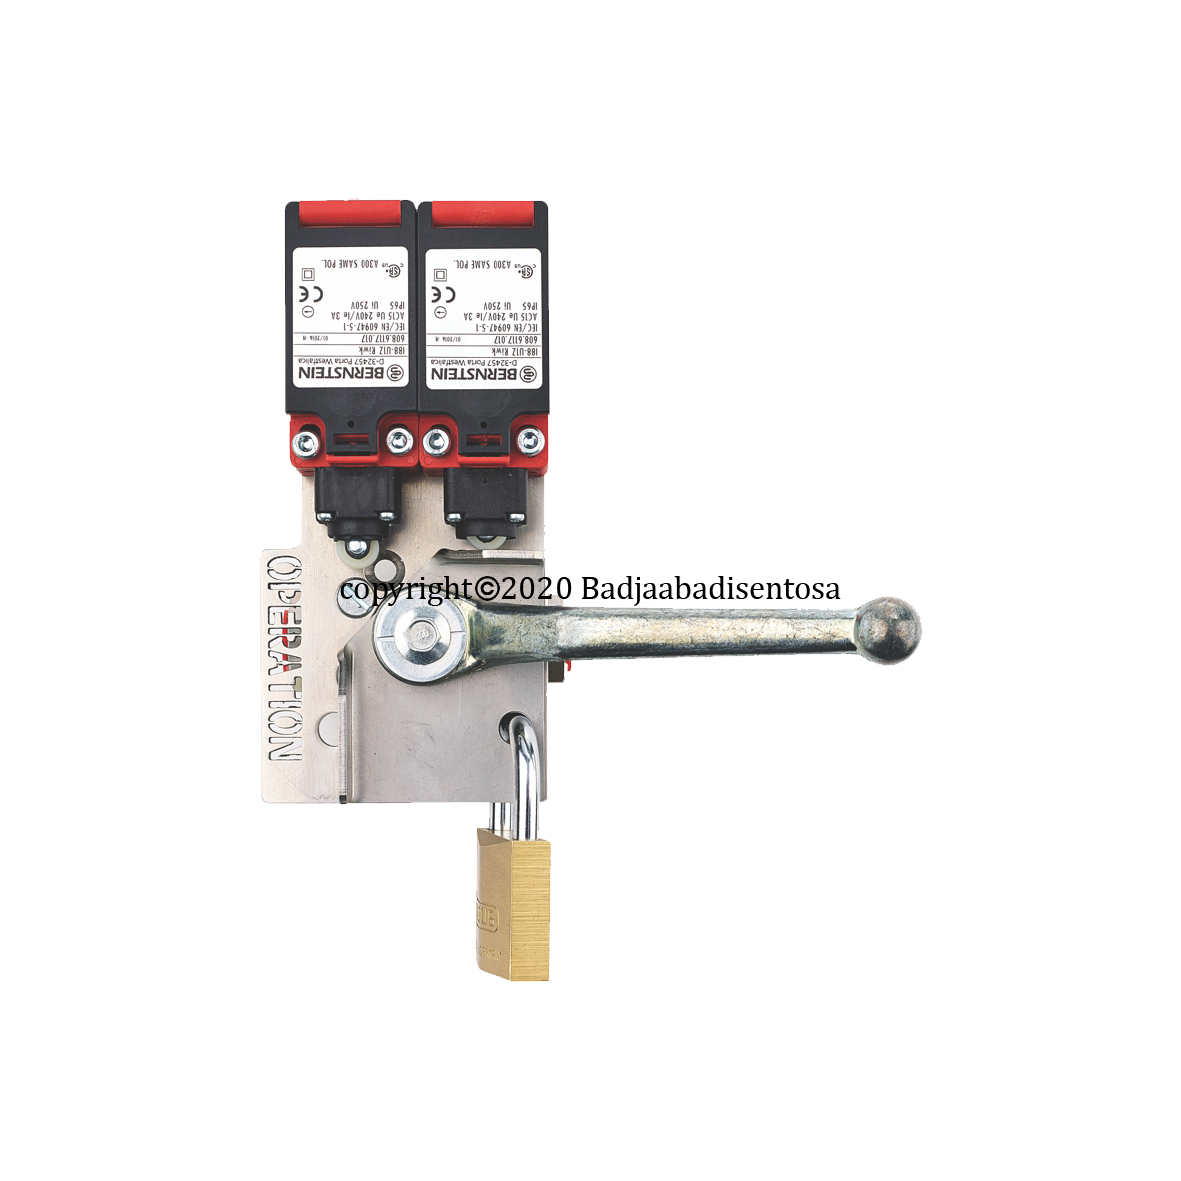 Rotarex - Firetec Complete Systems - Blocking Device for Pneumatic Directional Valves